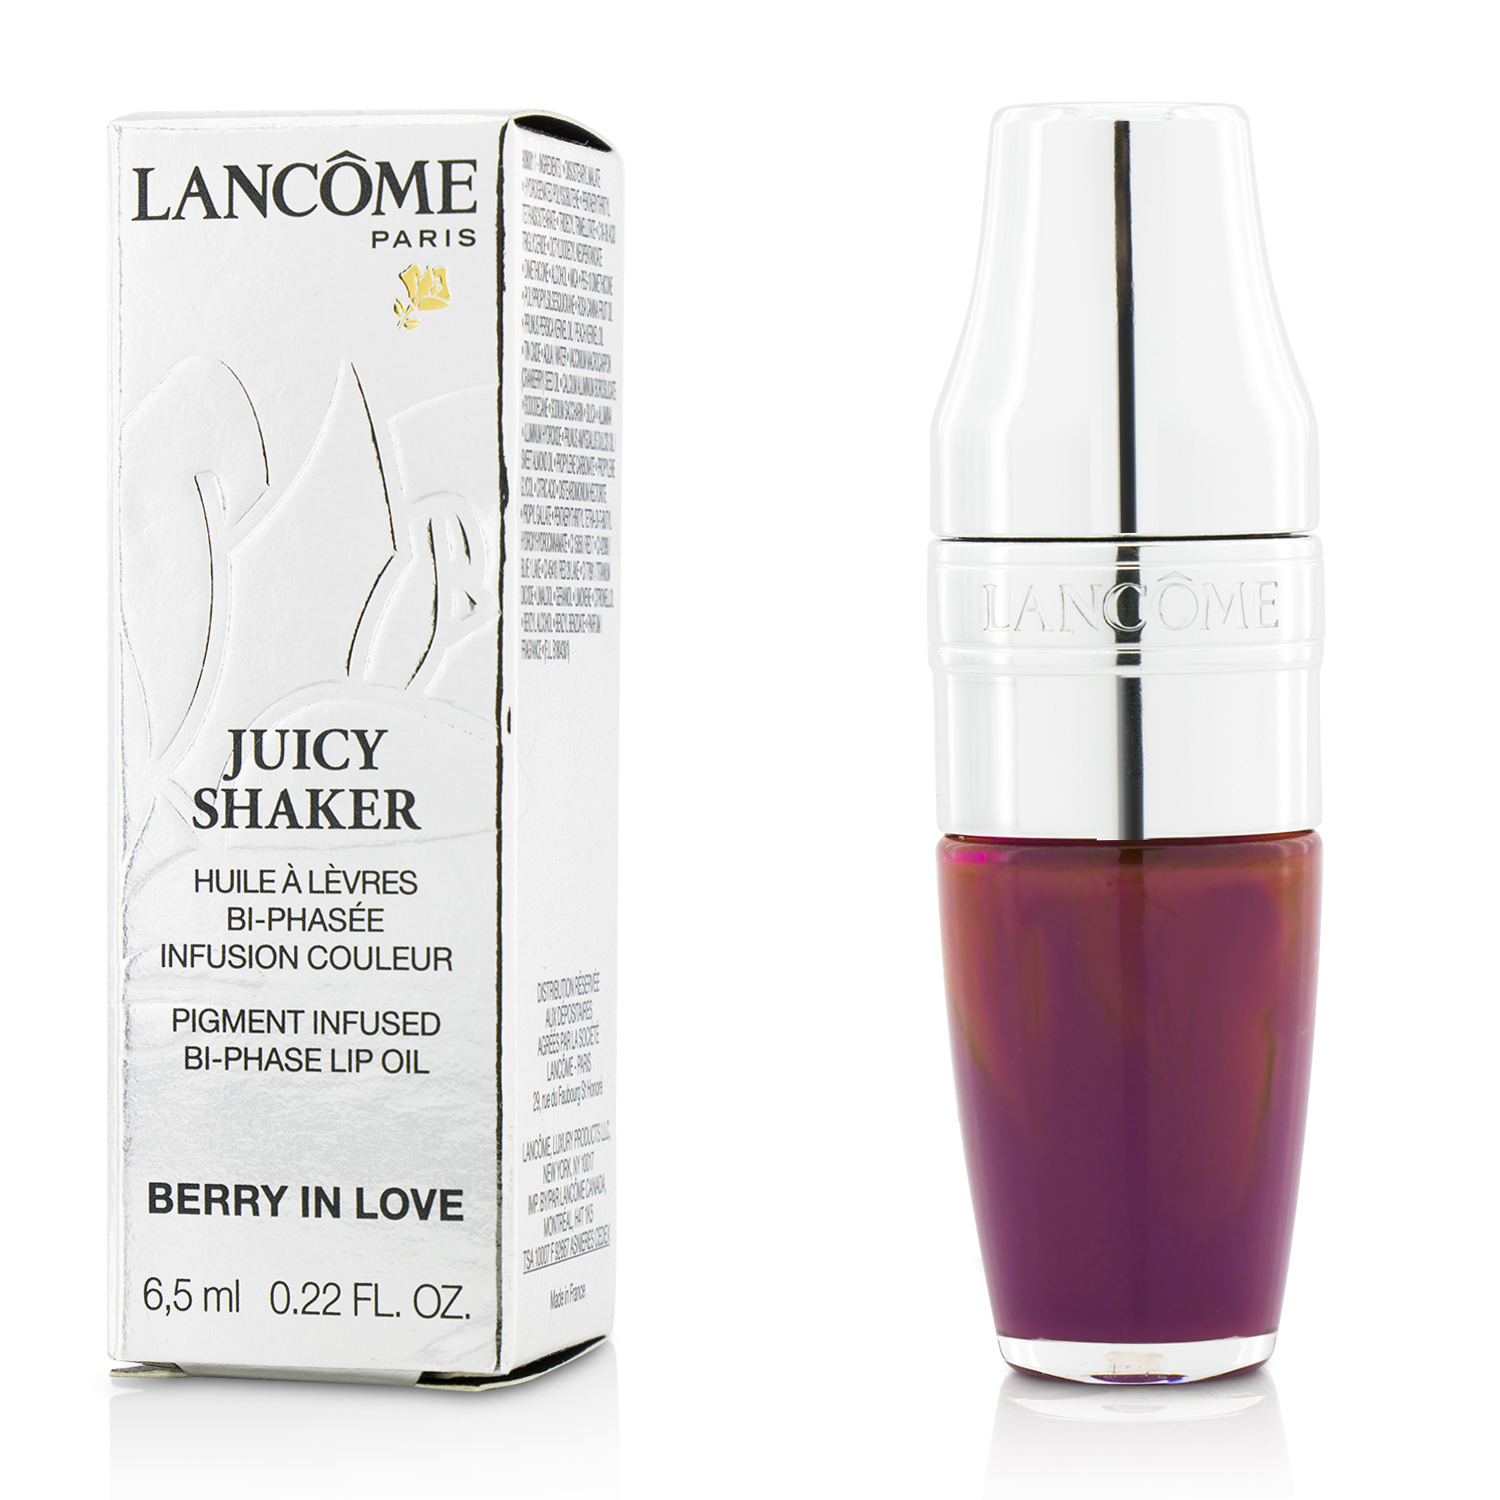 Juicy Shaker Pigment Infused Bi Phase Lip Oil - #283 Berry In Love Lancome Image